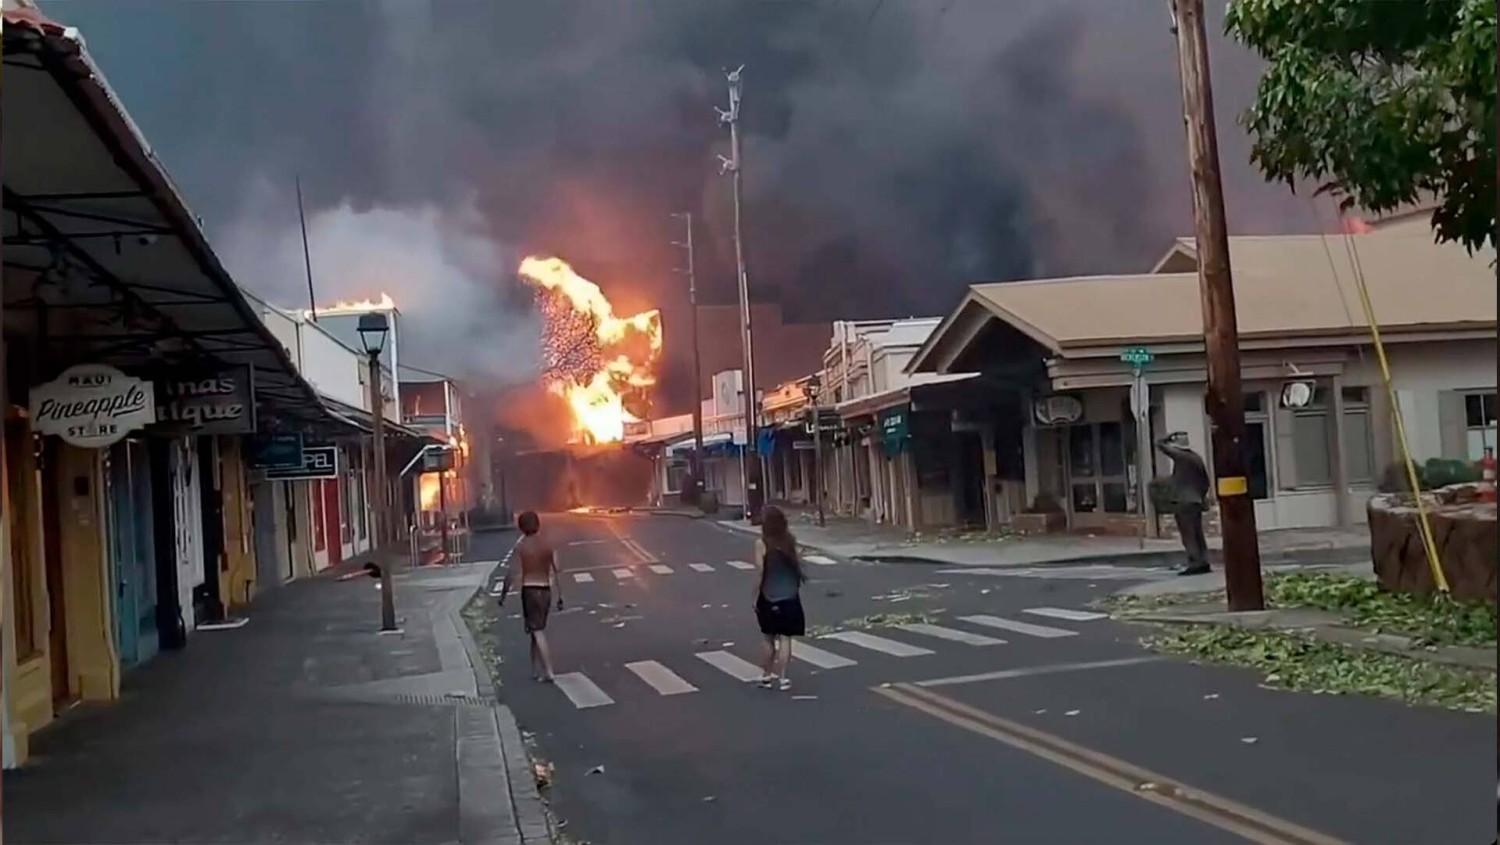 High winds propelled fires across the Hawaiian island of Maui, killing at least six people and severely damaging the historic town of Lahaina.